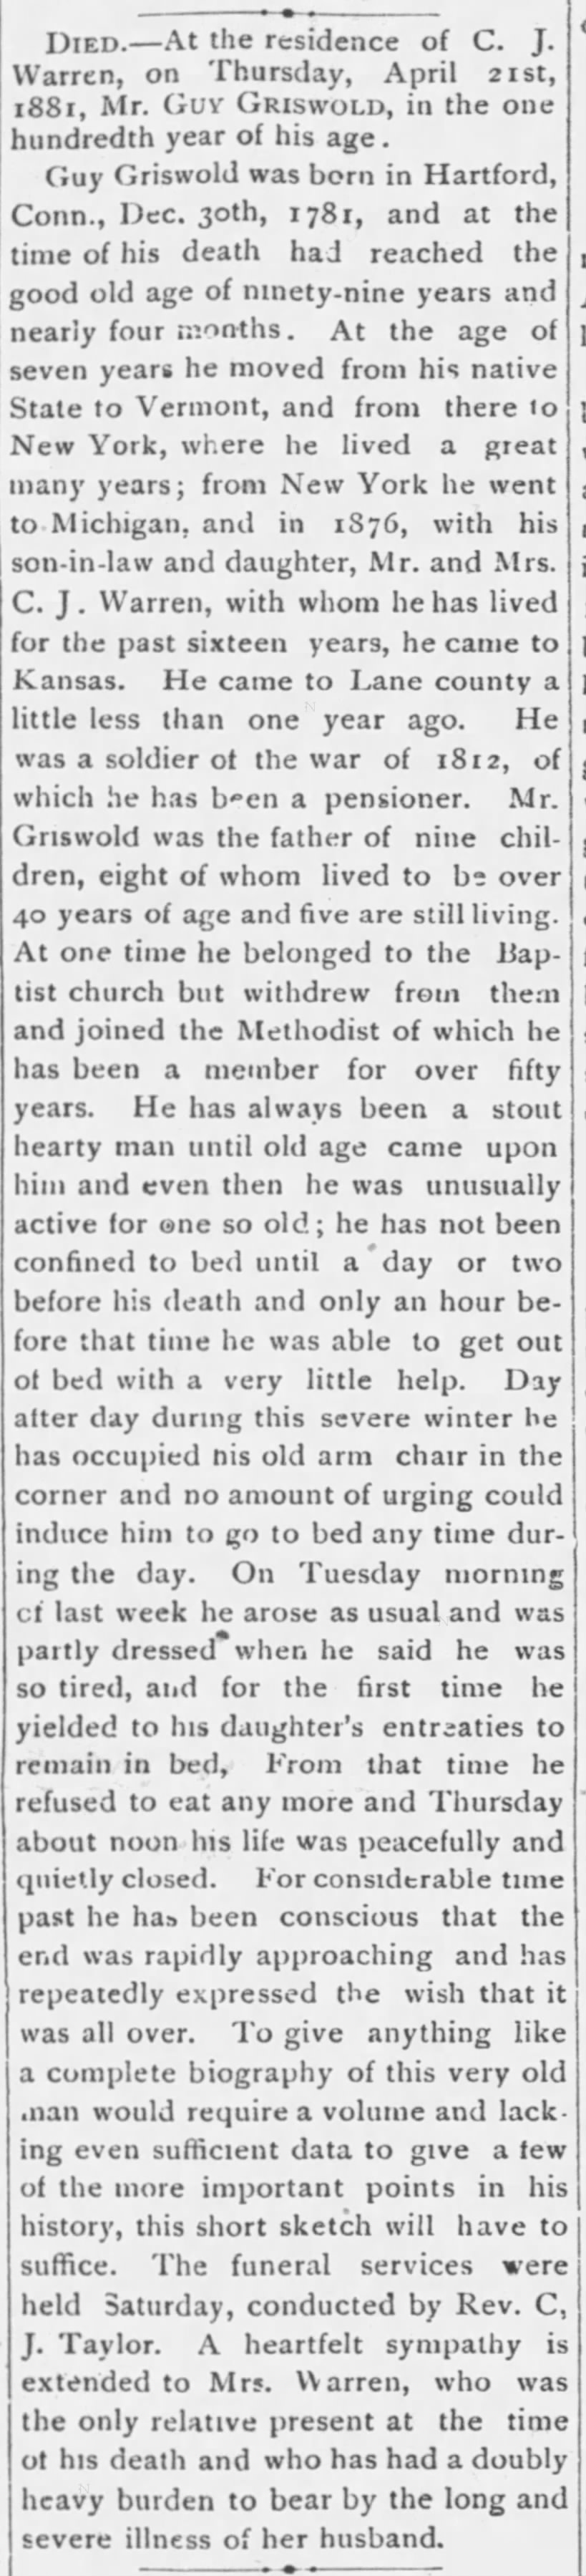 Long obit for Guy Griswald says he had 9 children, 8 lived over the age of 40, 5 were alive in 1881